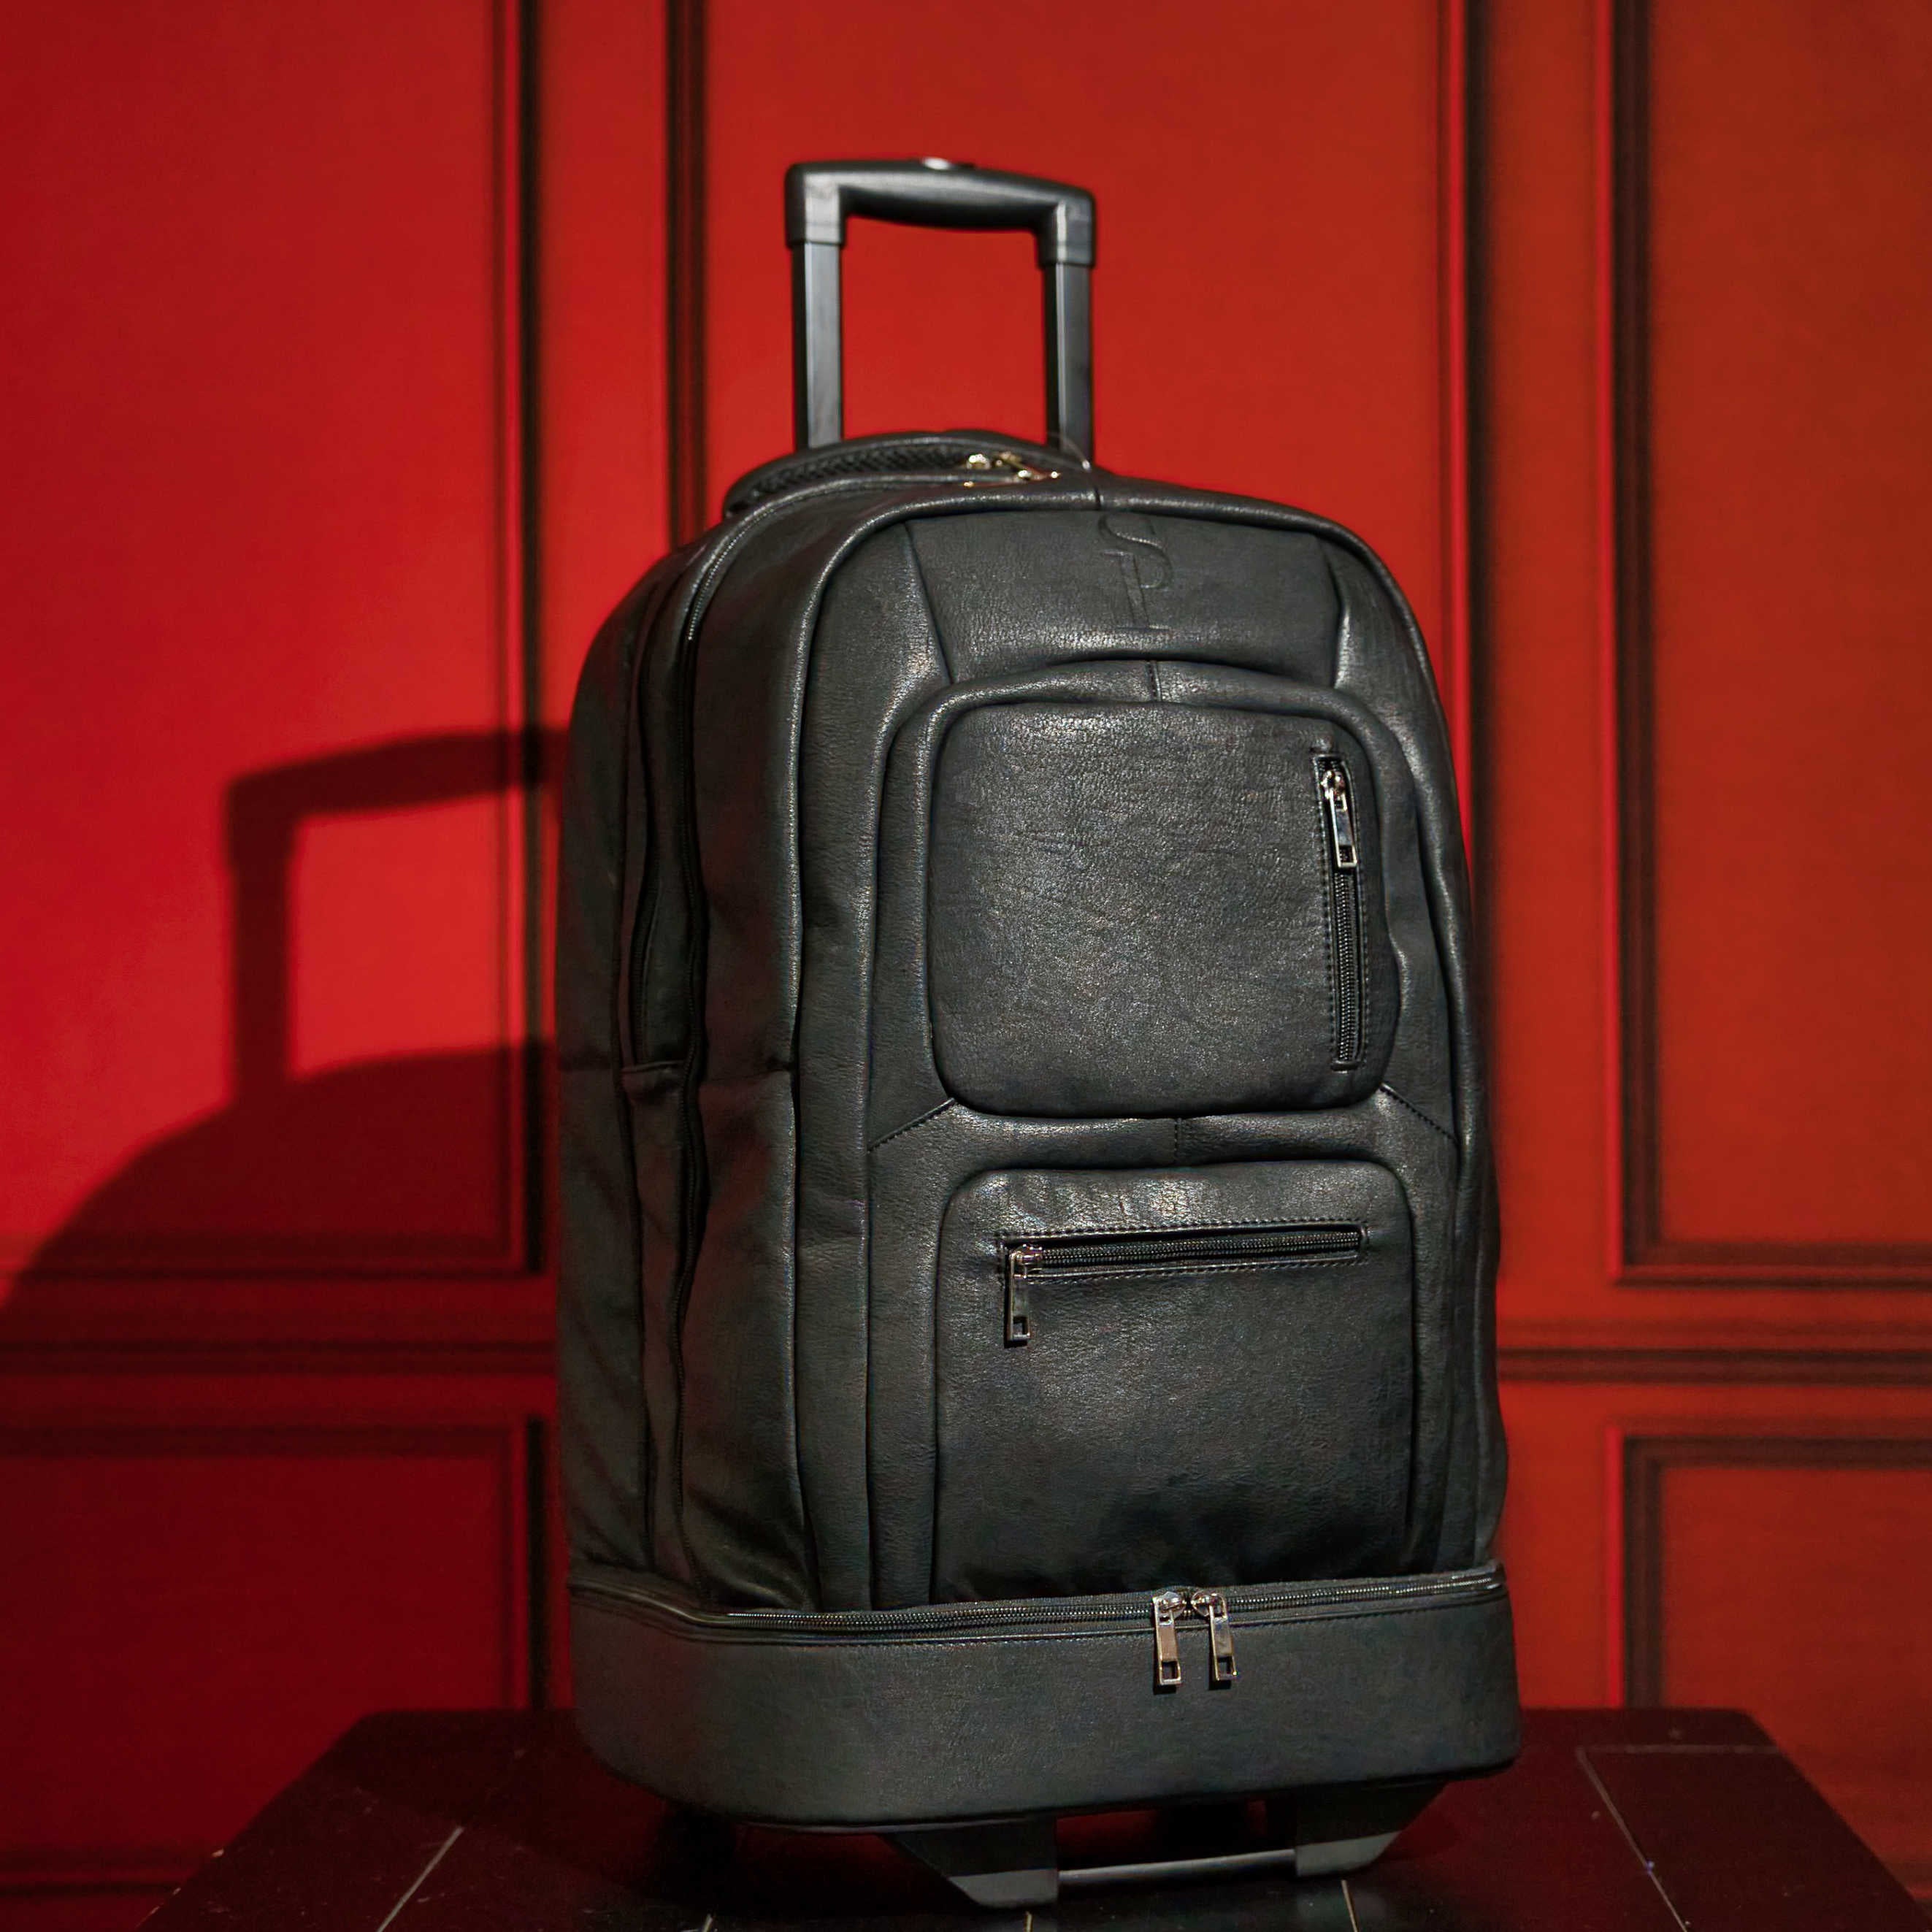 Black Tumbled Leather Roller Bag (Only 200 Made) - Sole Premise